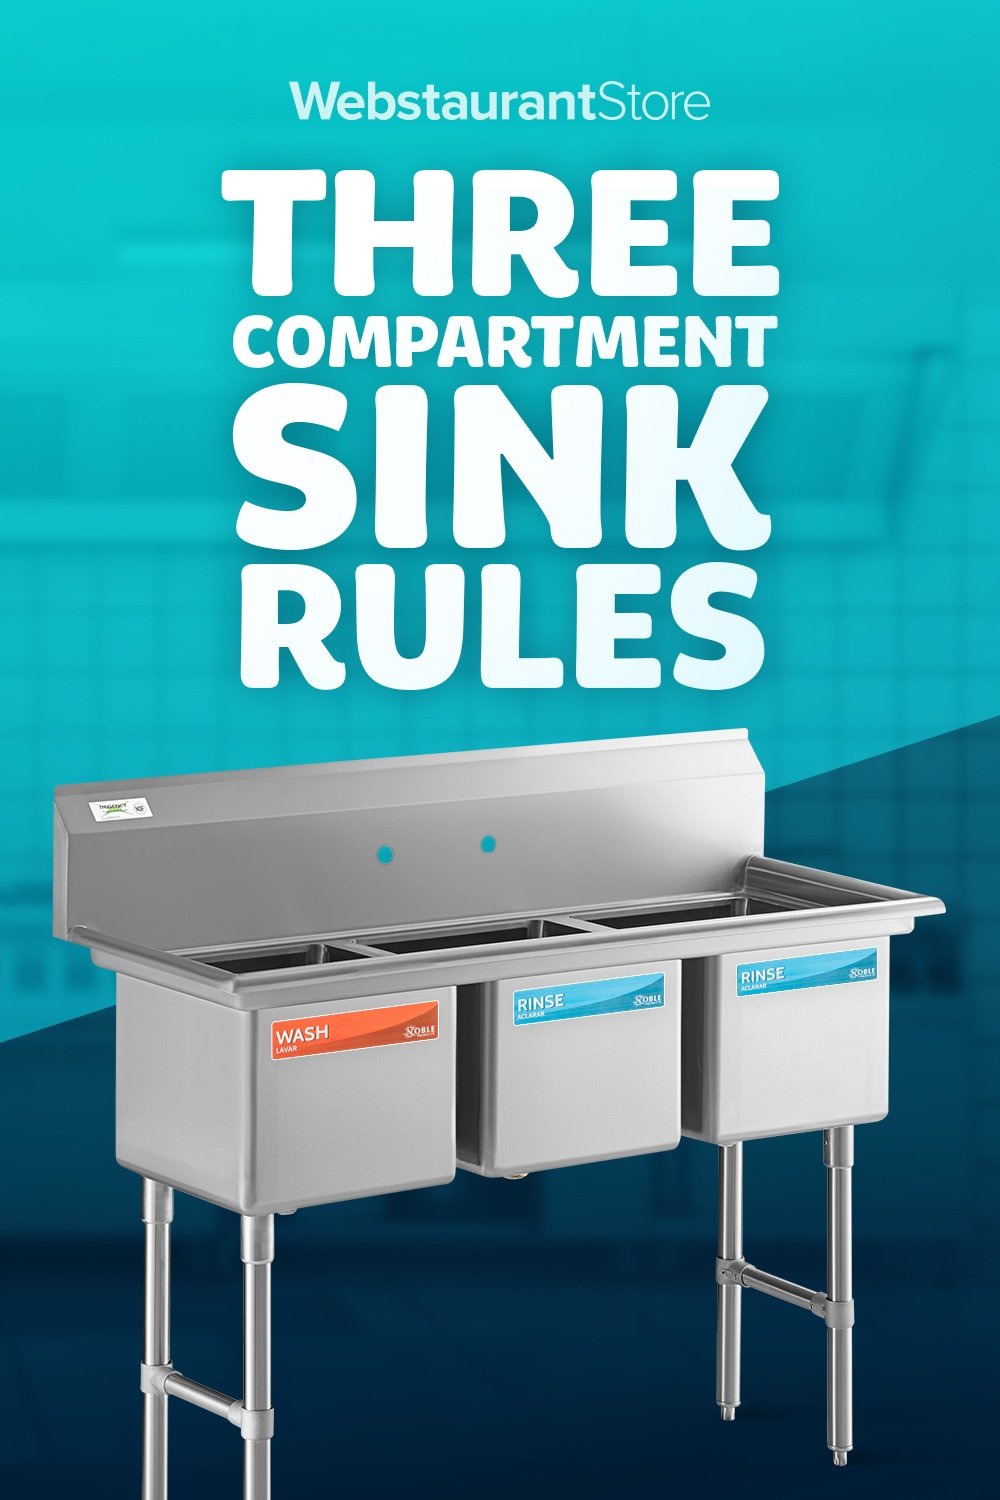 Which activity is not allowed in a 3 compartment sink